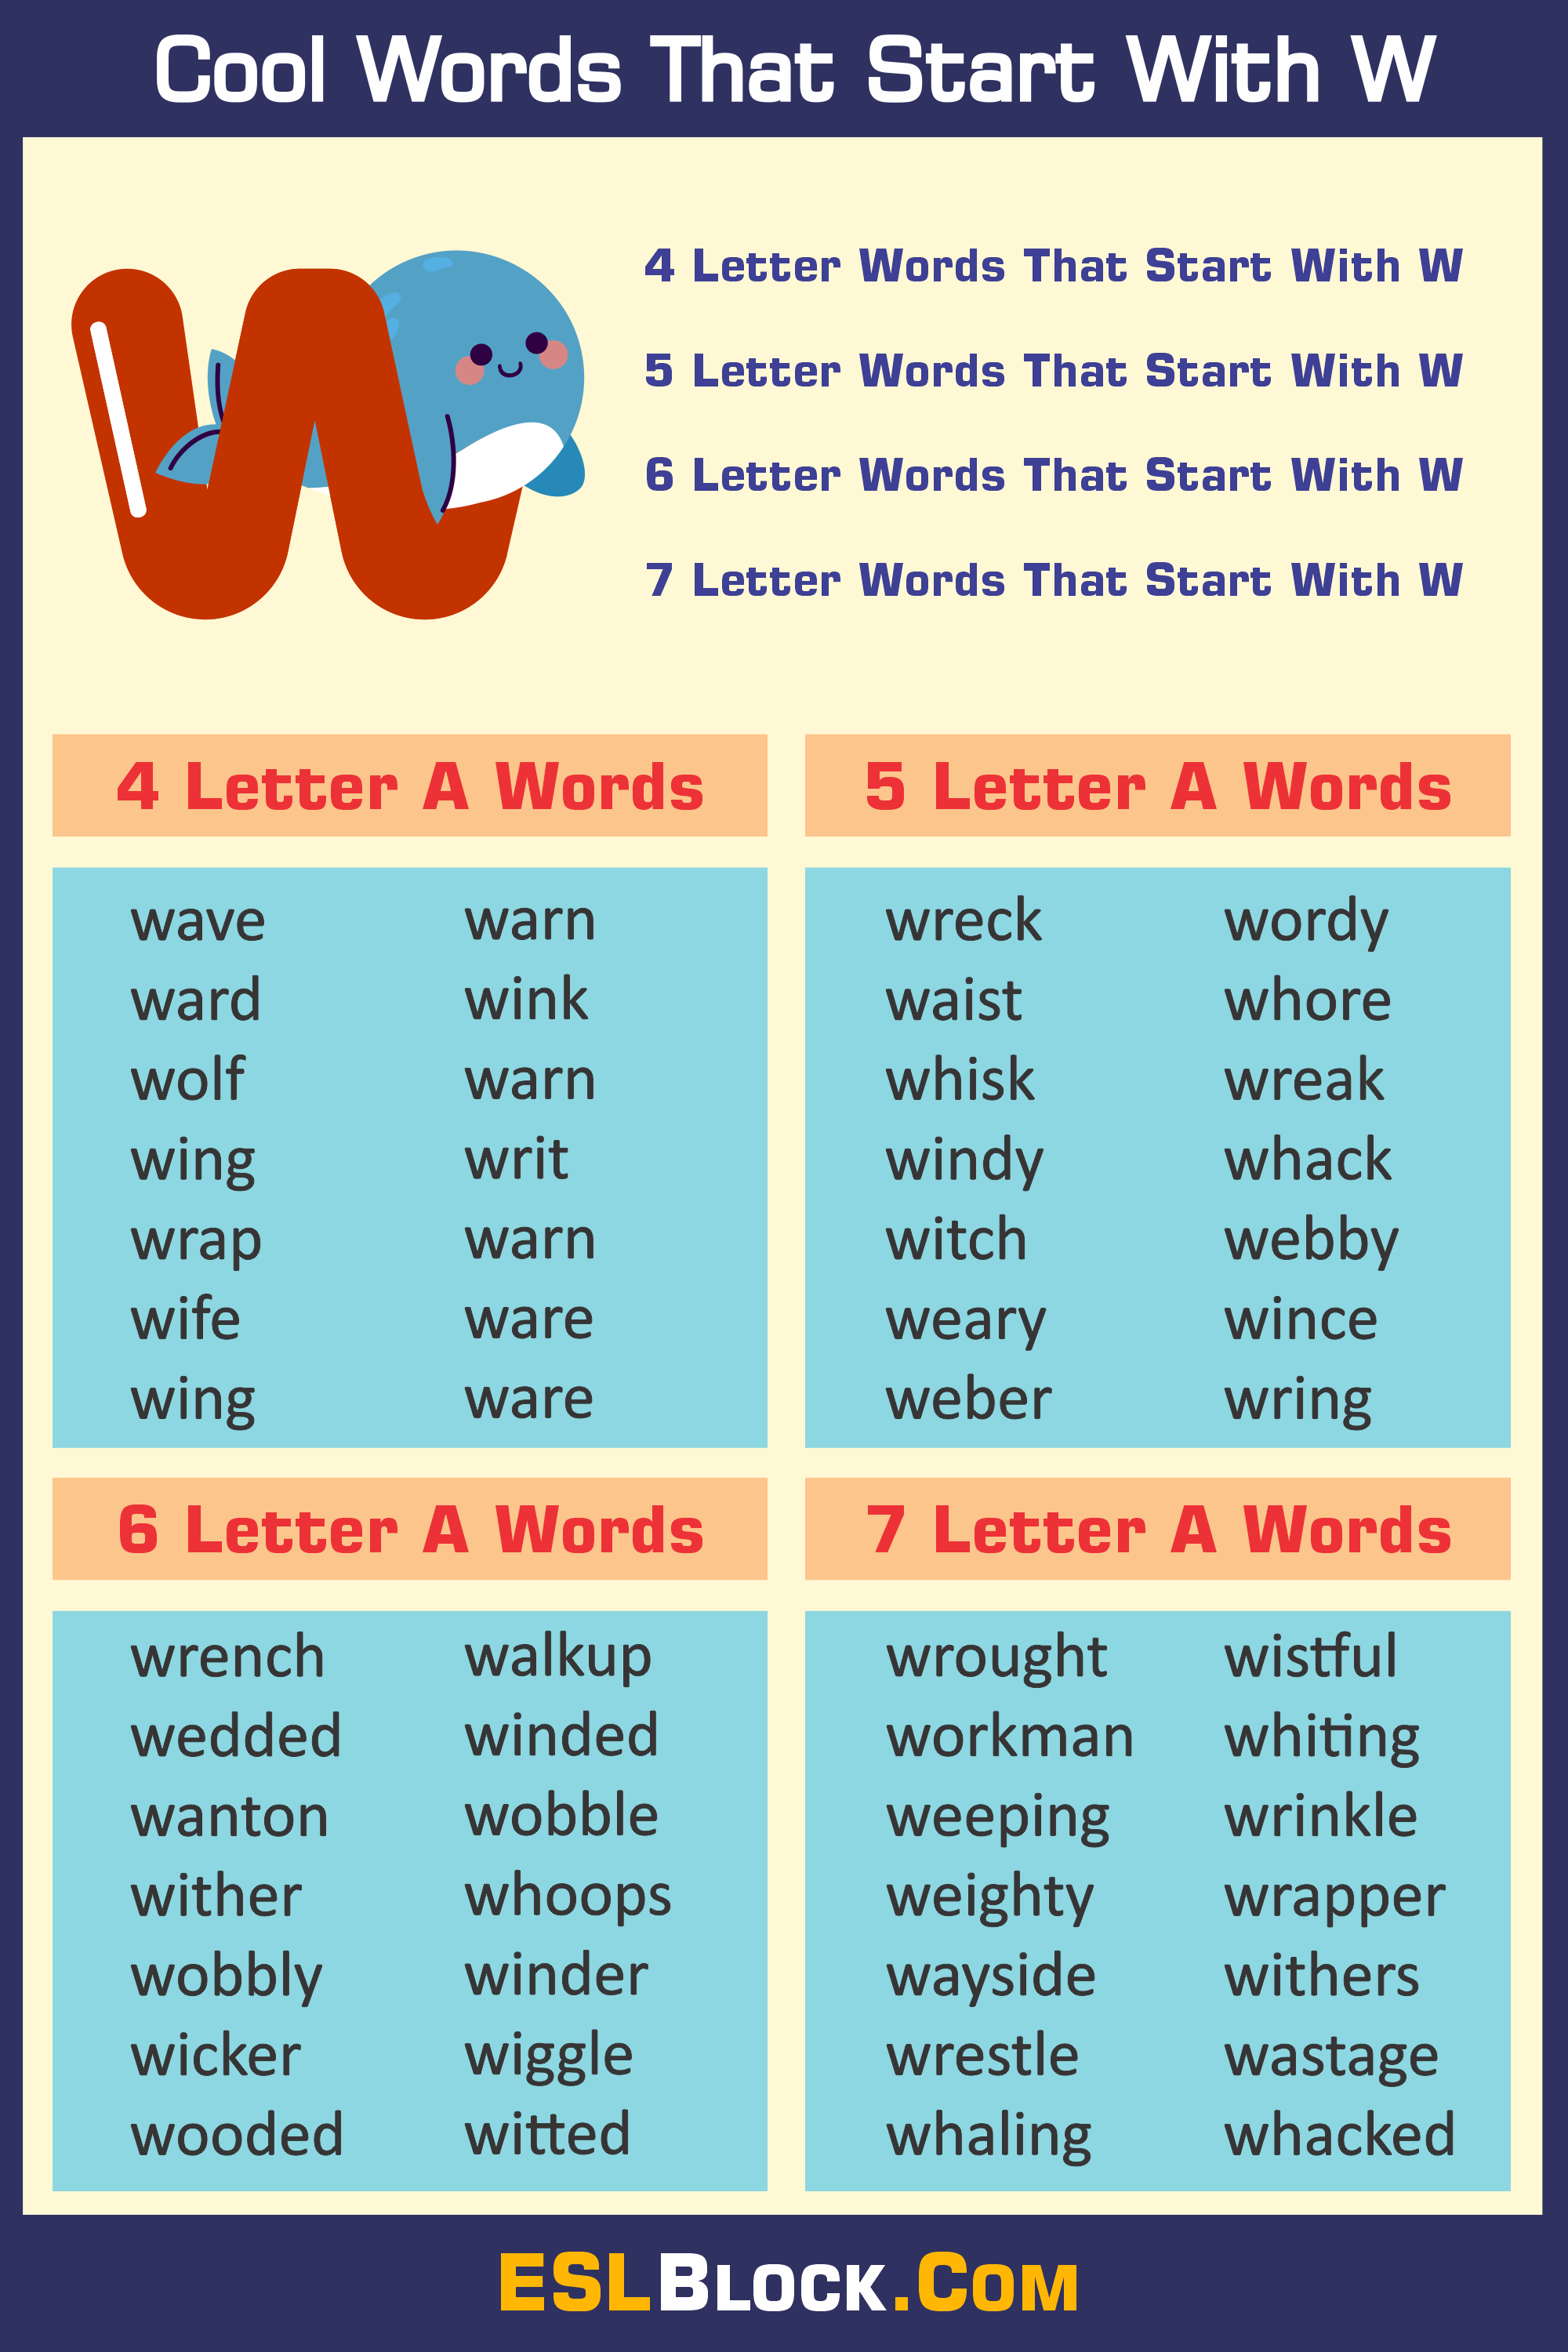 4 Letter Words, 4 Letter Words That Start With W, 5 Letter Words, 5 Letter Words That Start With W, 6 Letter Words, 6 Letter Words That Start With W, 7 Letter Words, 7 Letter Words That Start With W, Awesome Cool Words, Christmas Words That Start With W, Cool Words, Describing Words That Start With W, Descriptive Words That Start With W, English Words, Five Letter Words Starting with W, Good Words That Start With W, Nice Words That Start With W, Positive Words That Start With W, Unique Words, W Words, Word Dictionary, Words That Start With W, Words That Start With W to Describe Someone